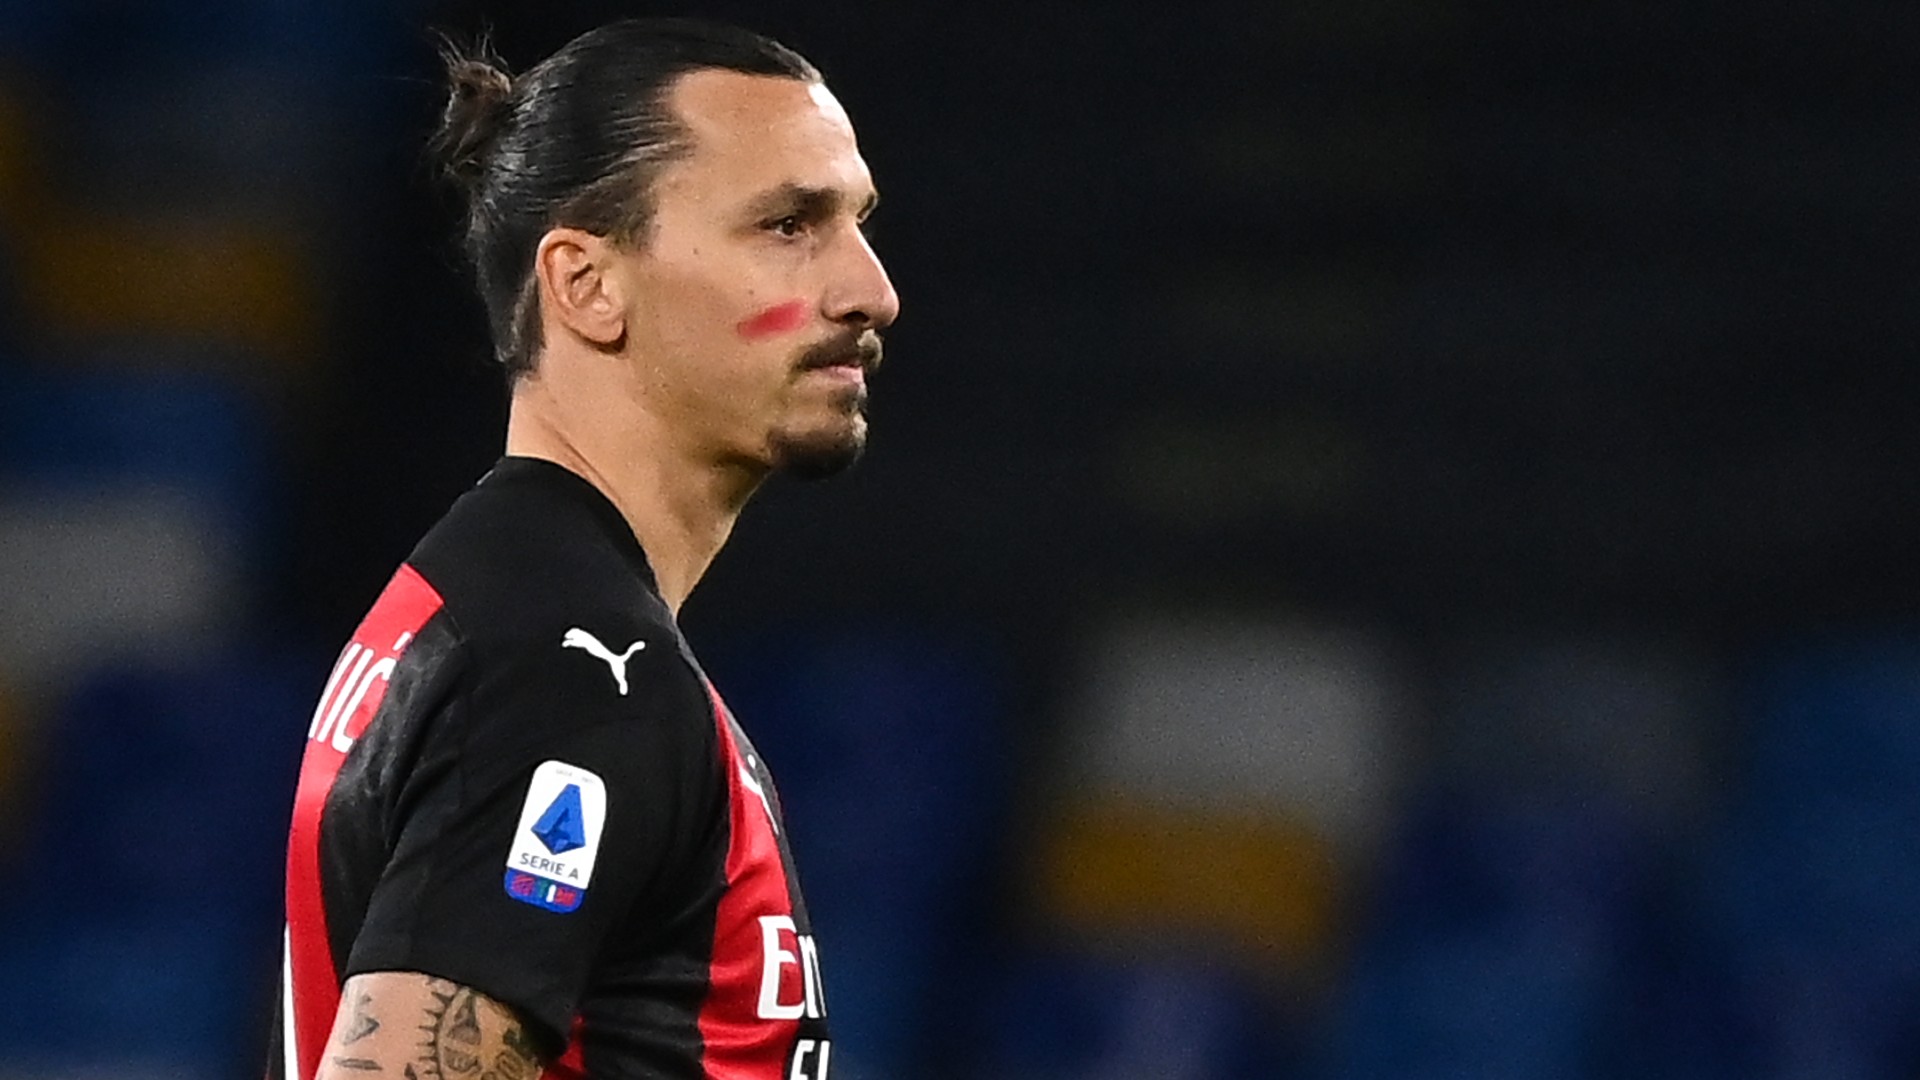 Huge blow for AC Milan as Ibrahimovic ruled out of crunch Juventus clash